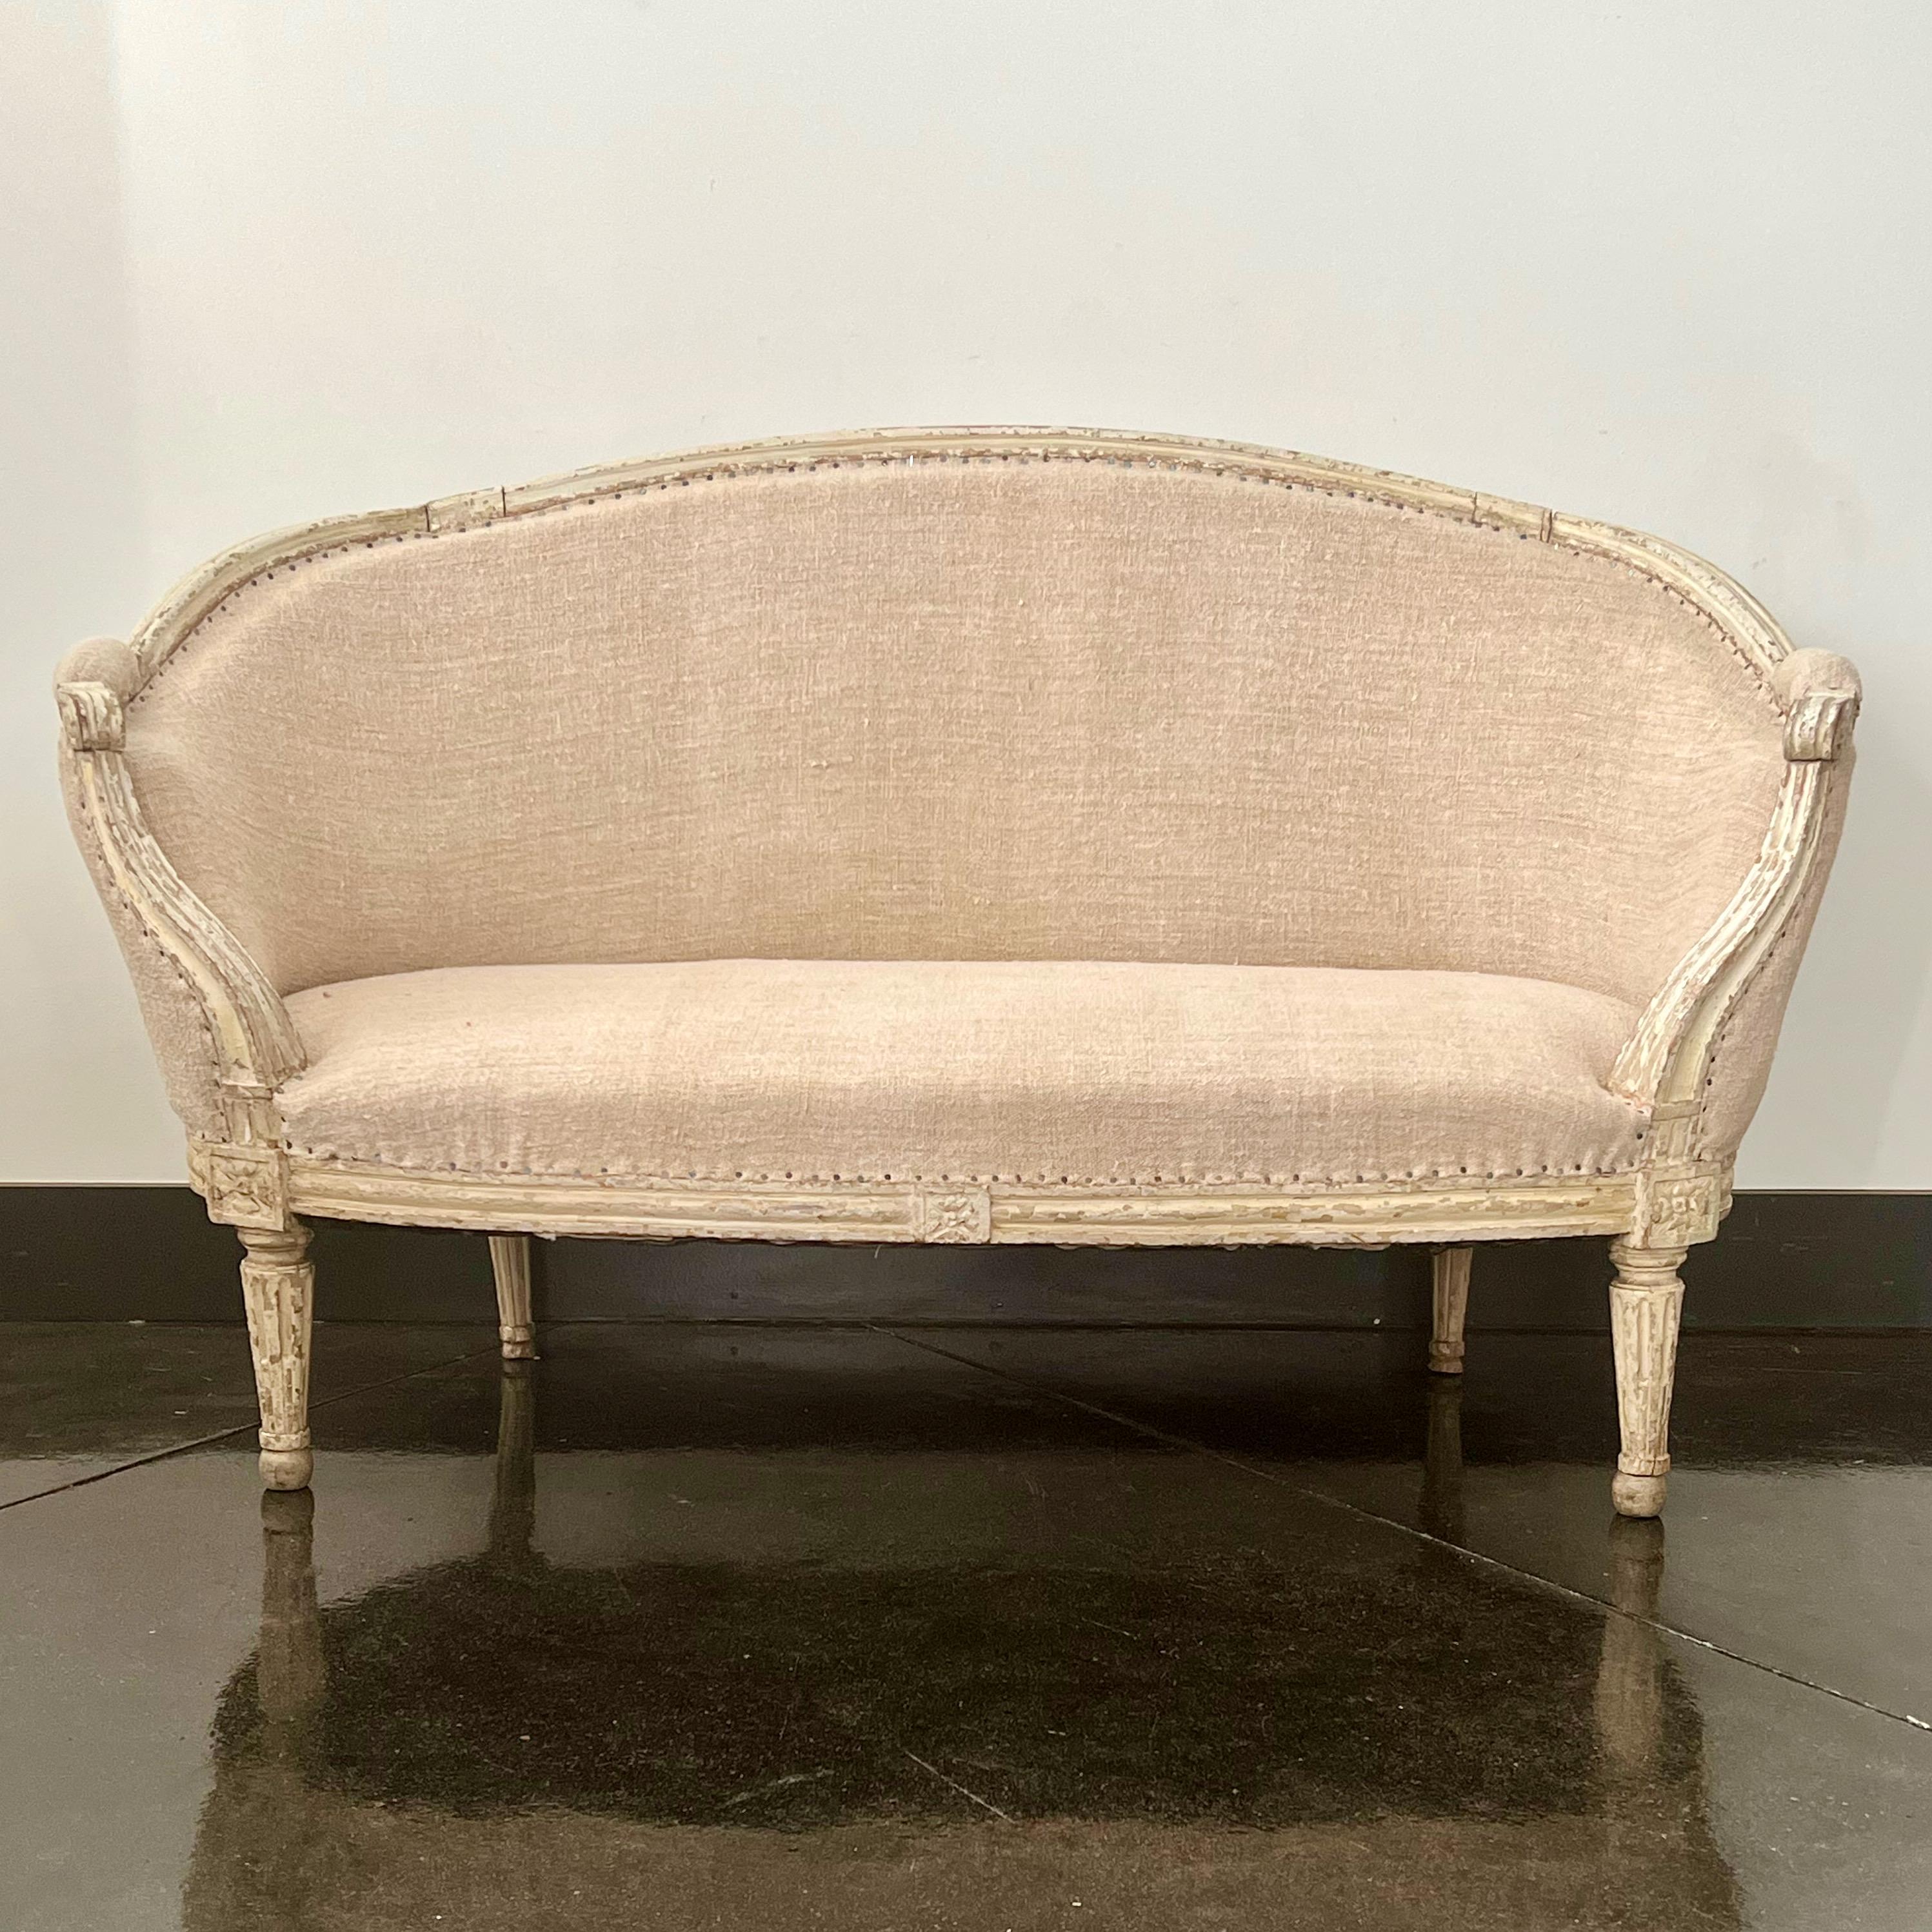 An elegant Louis XVI period settee with painted frame, and tapered fluted legs. re-upholstered in antique linens. 
France circa 1760.